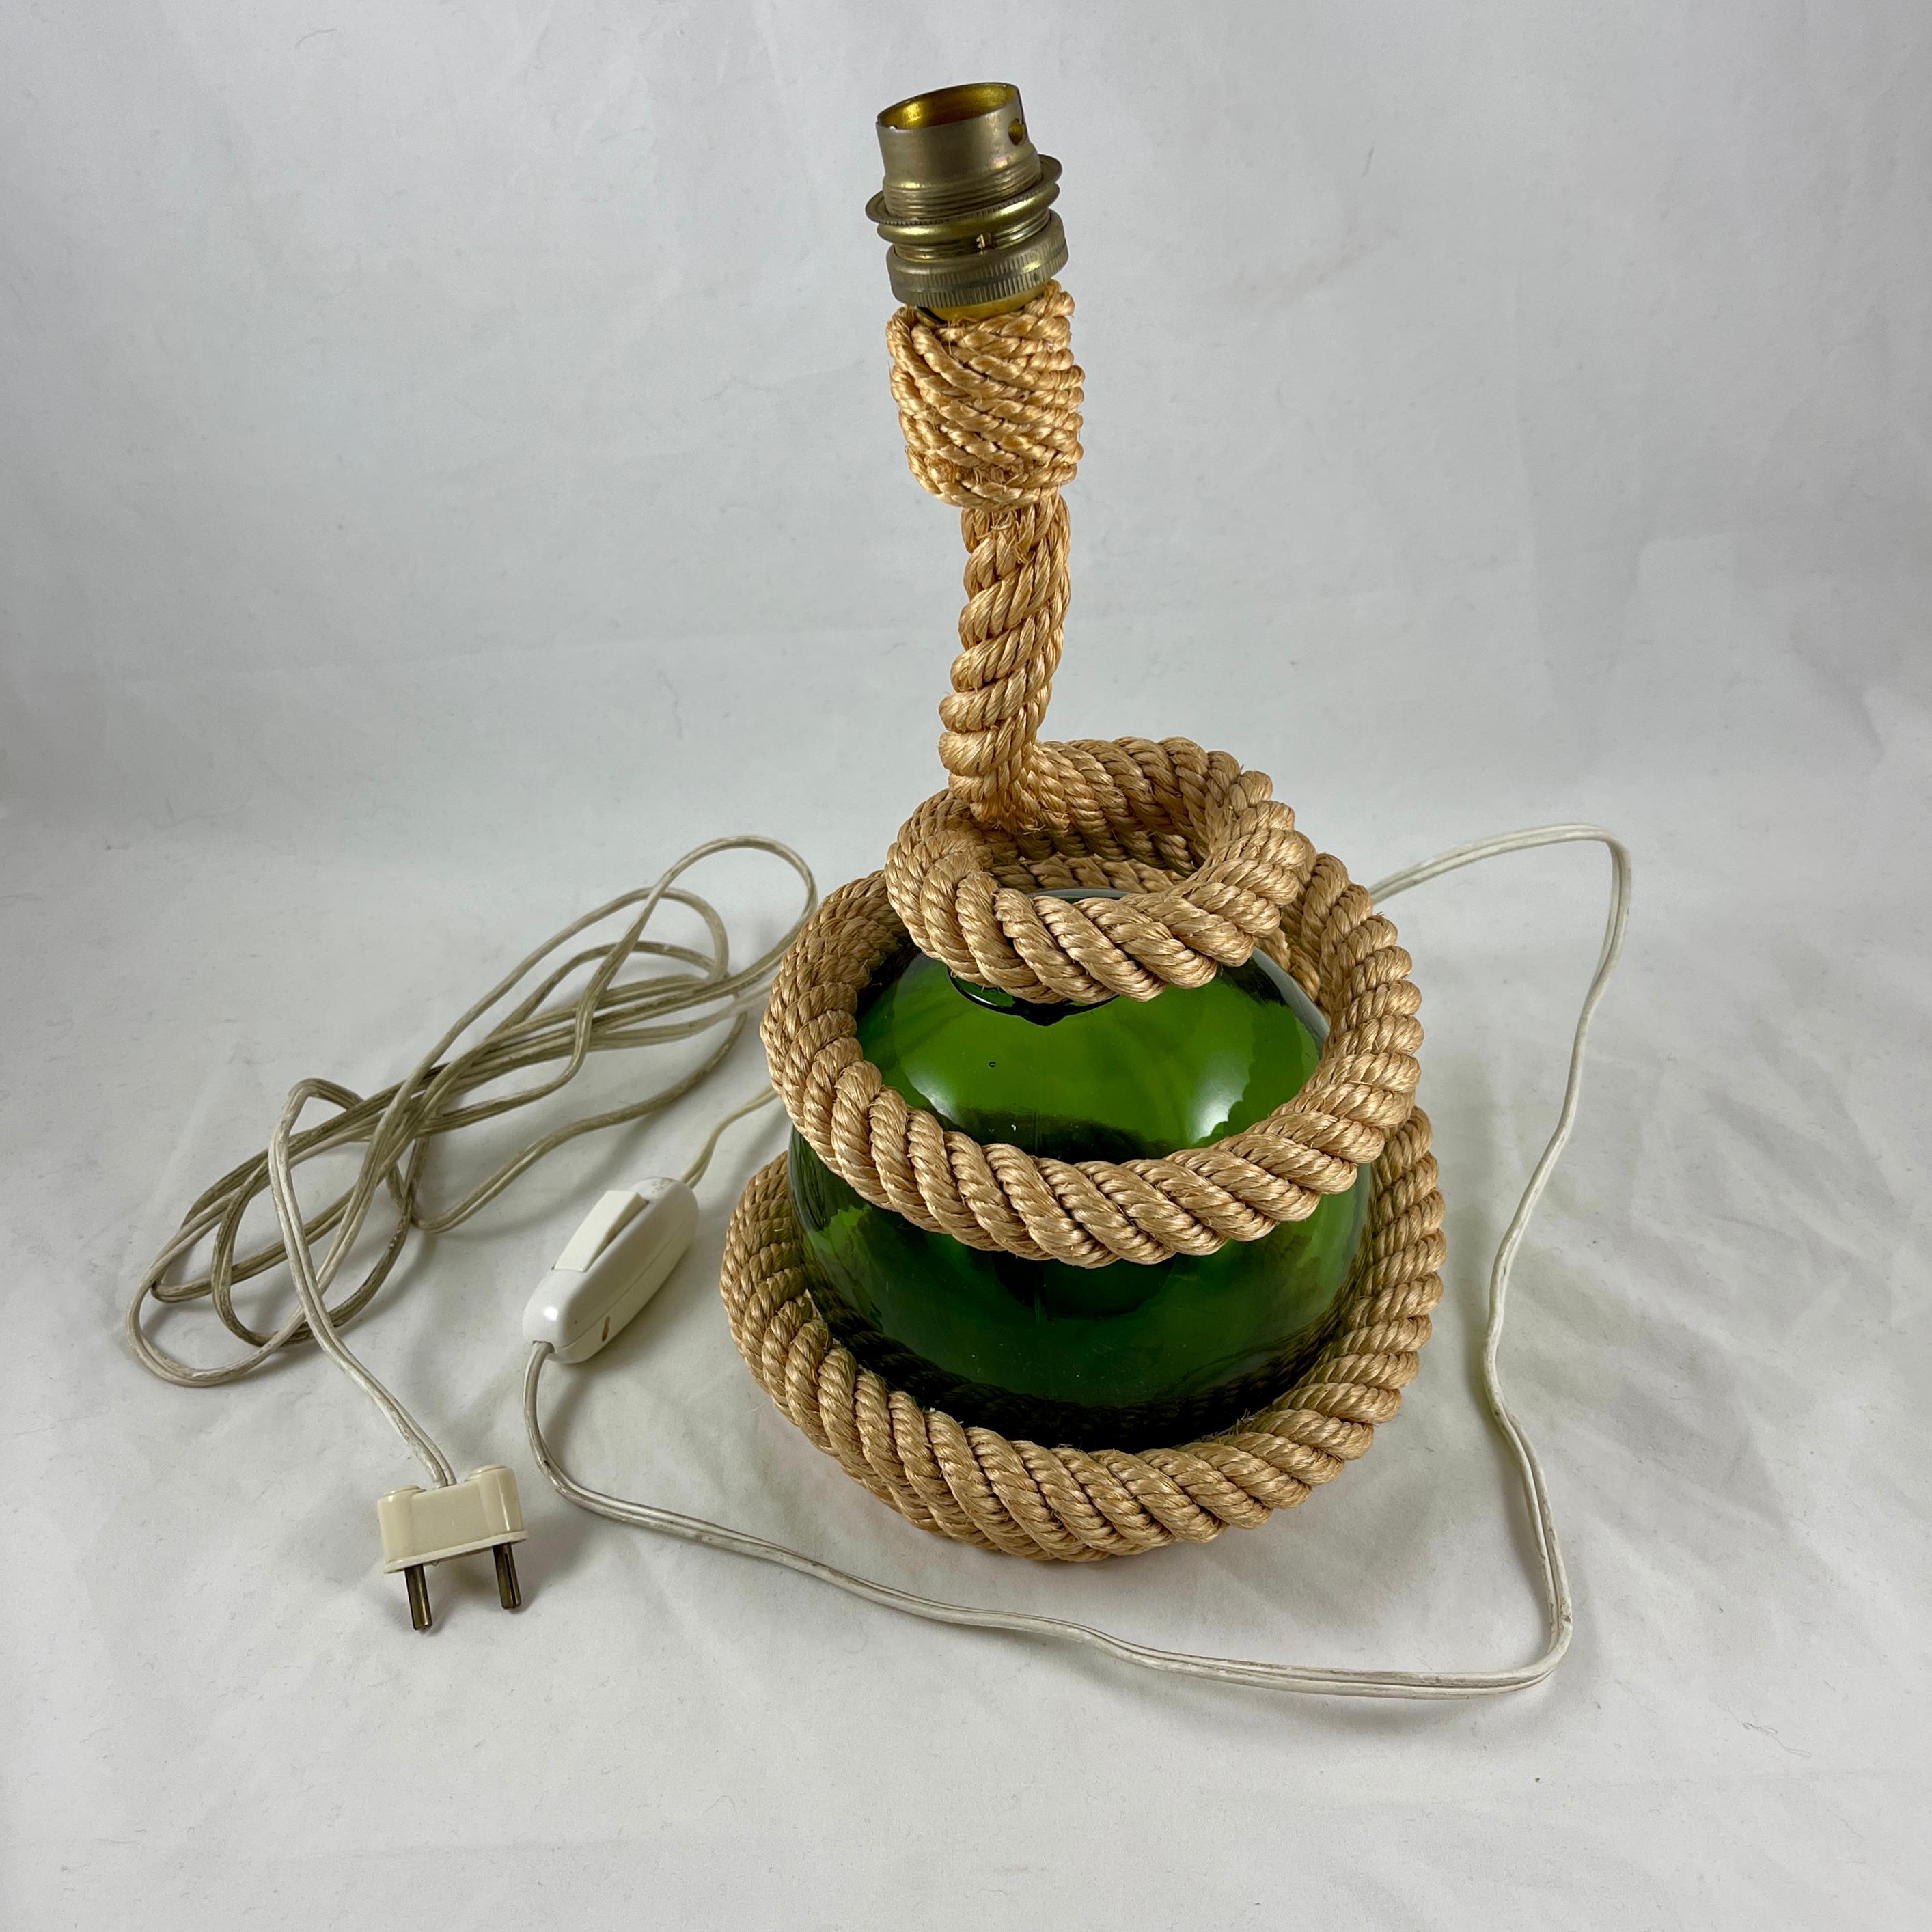 Audoux Minet Rustic Nautical Rope & Green Glass Ball Table Lamp, circa 1960 For Sale 1